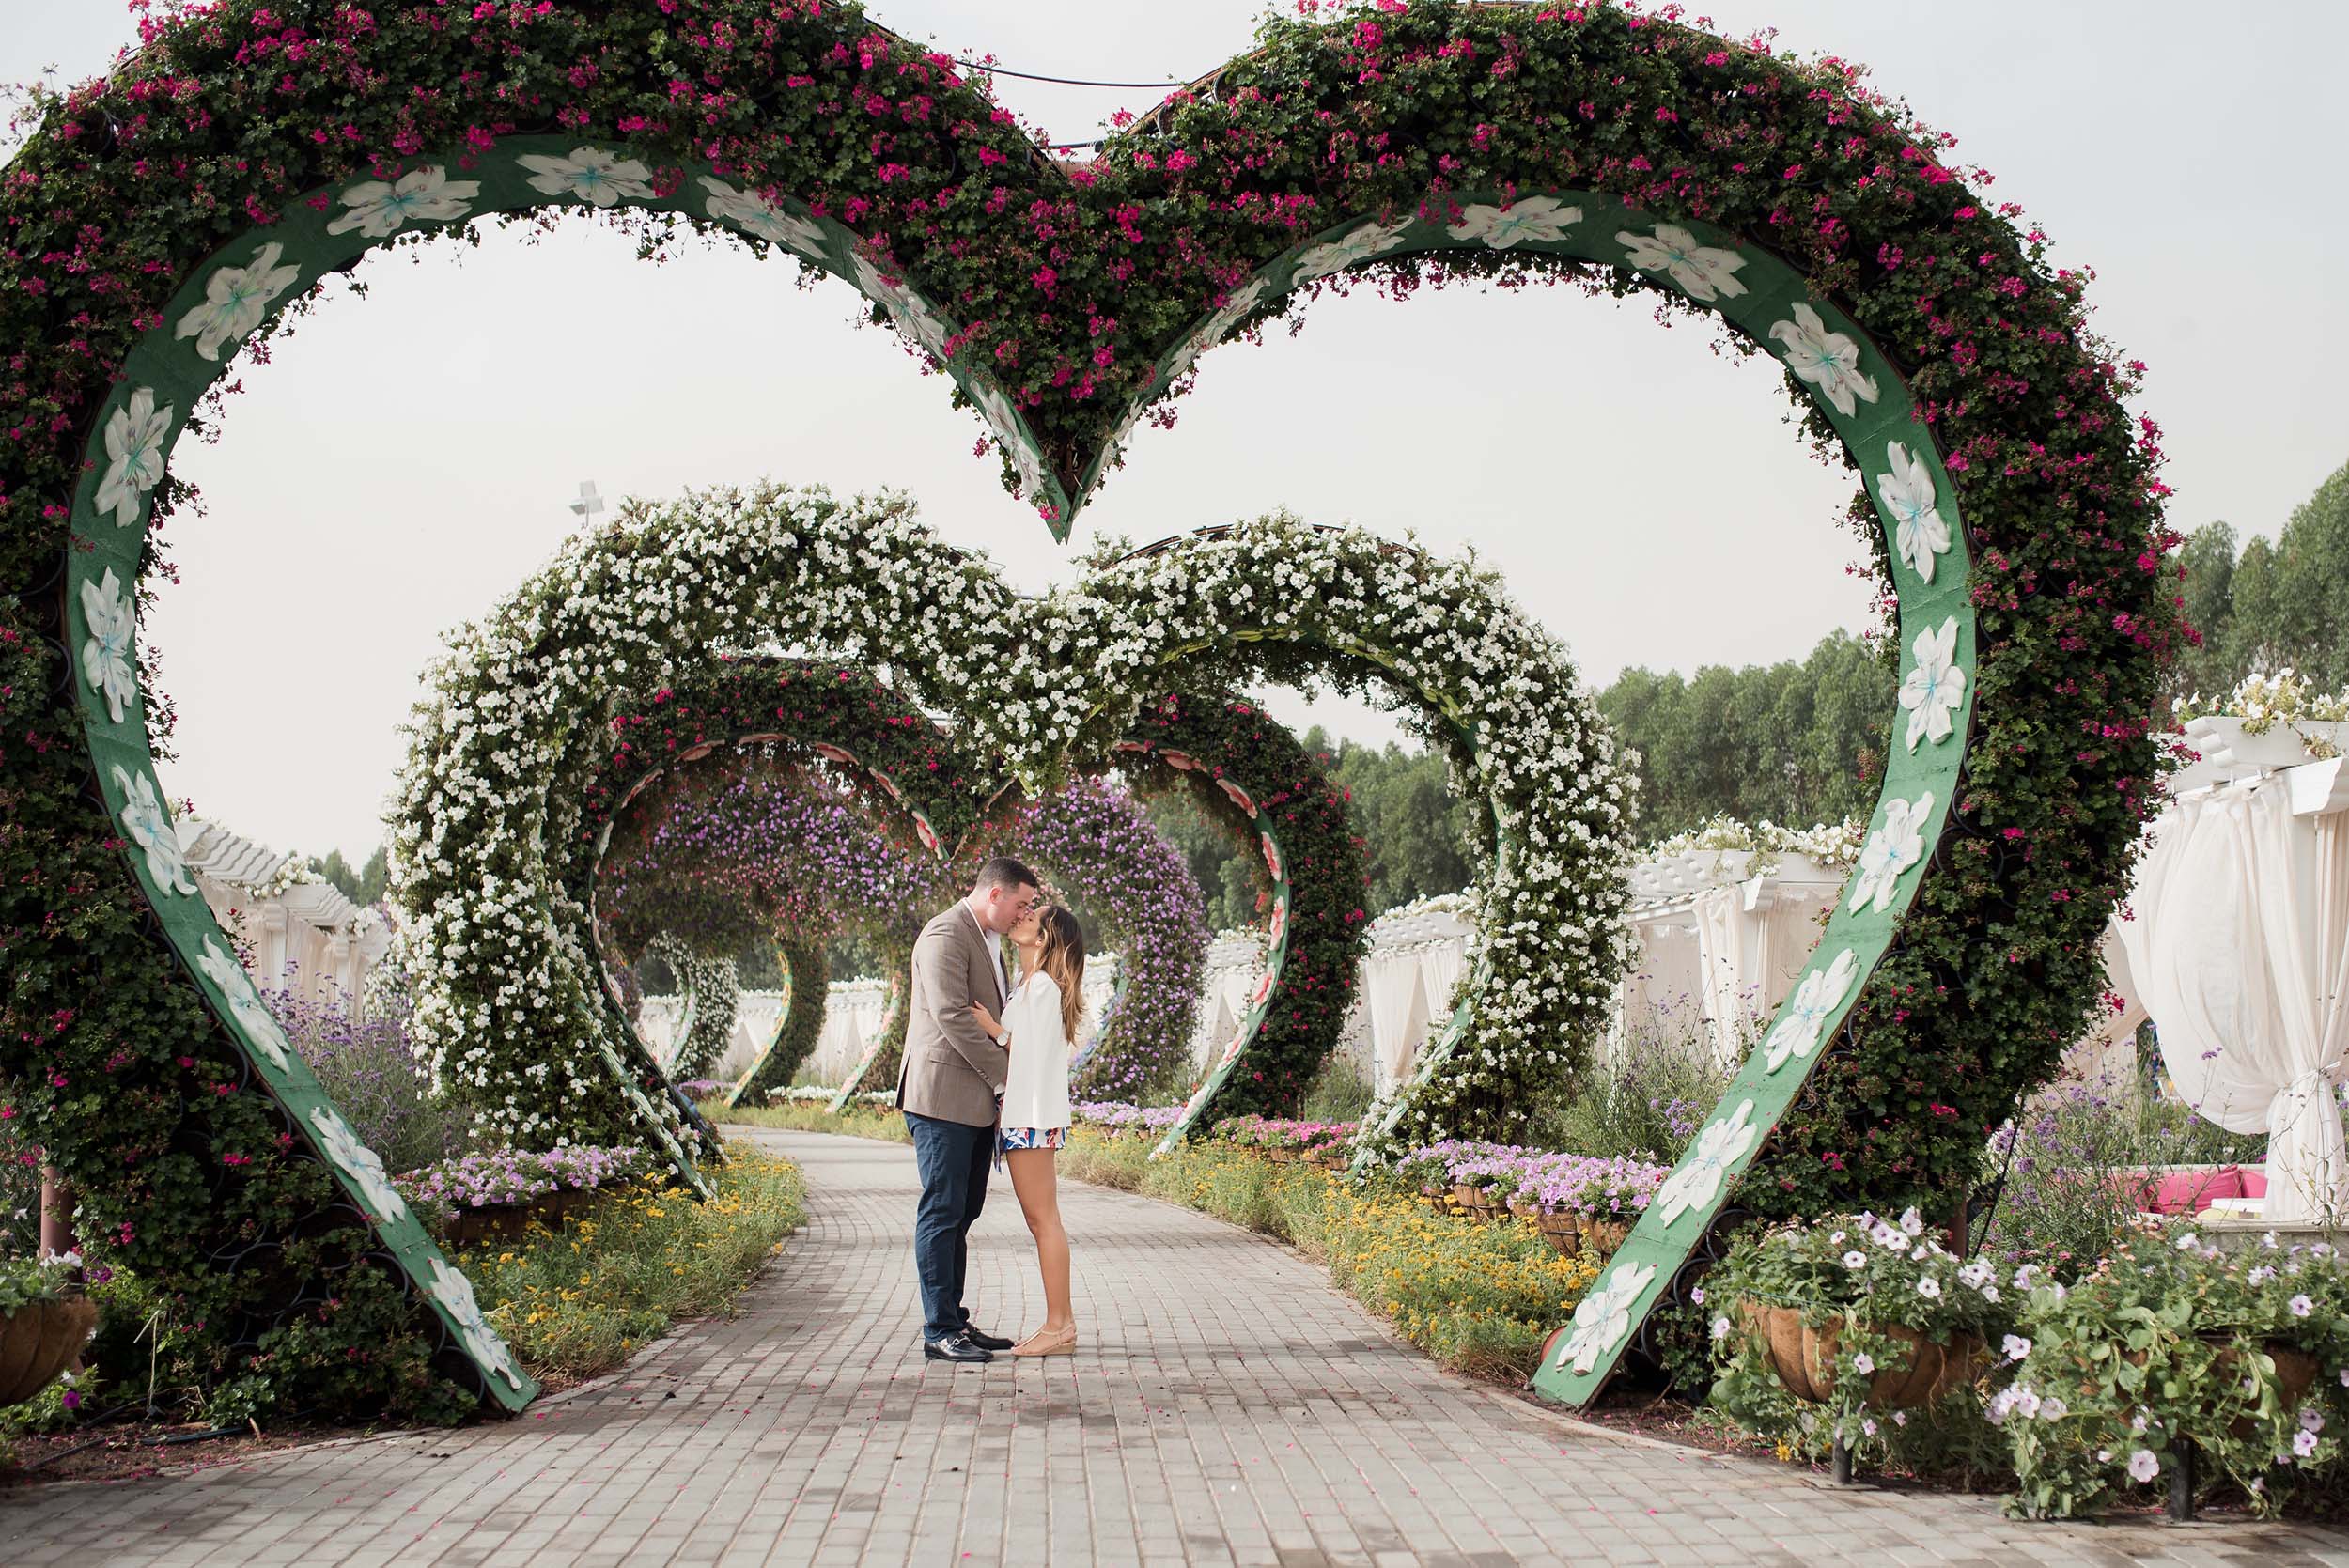 A Romantic Surprise Proposal in Miracle Garden